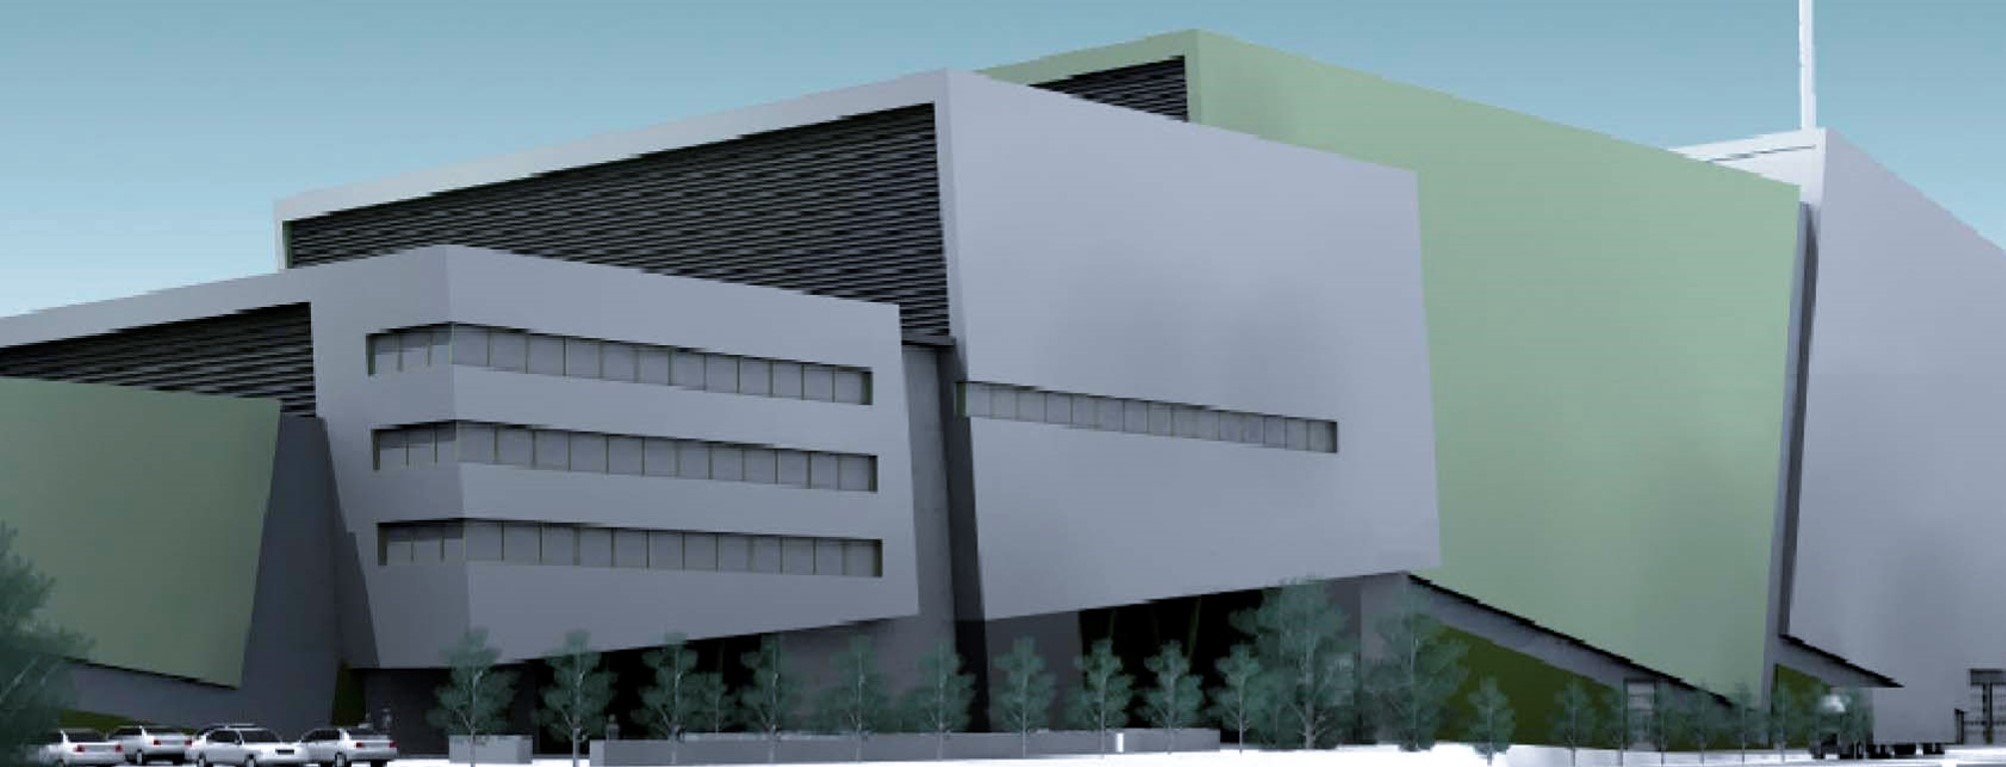 energy from waste facility 3D artist impression